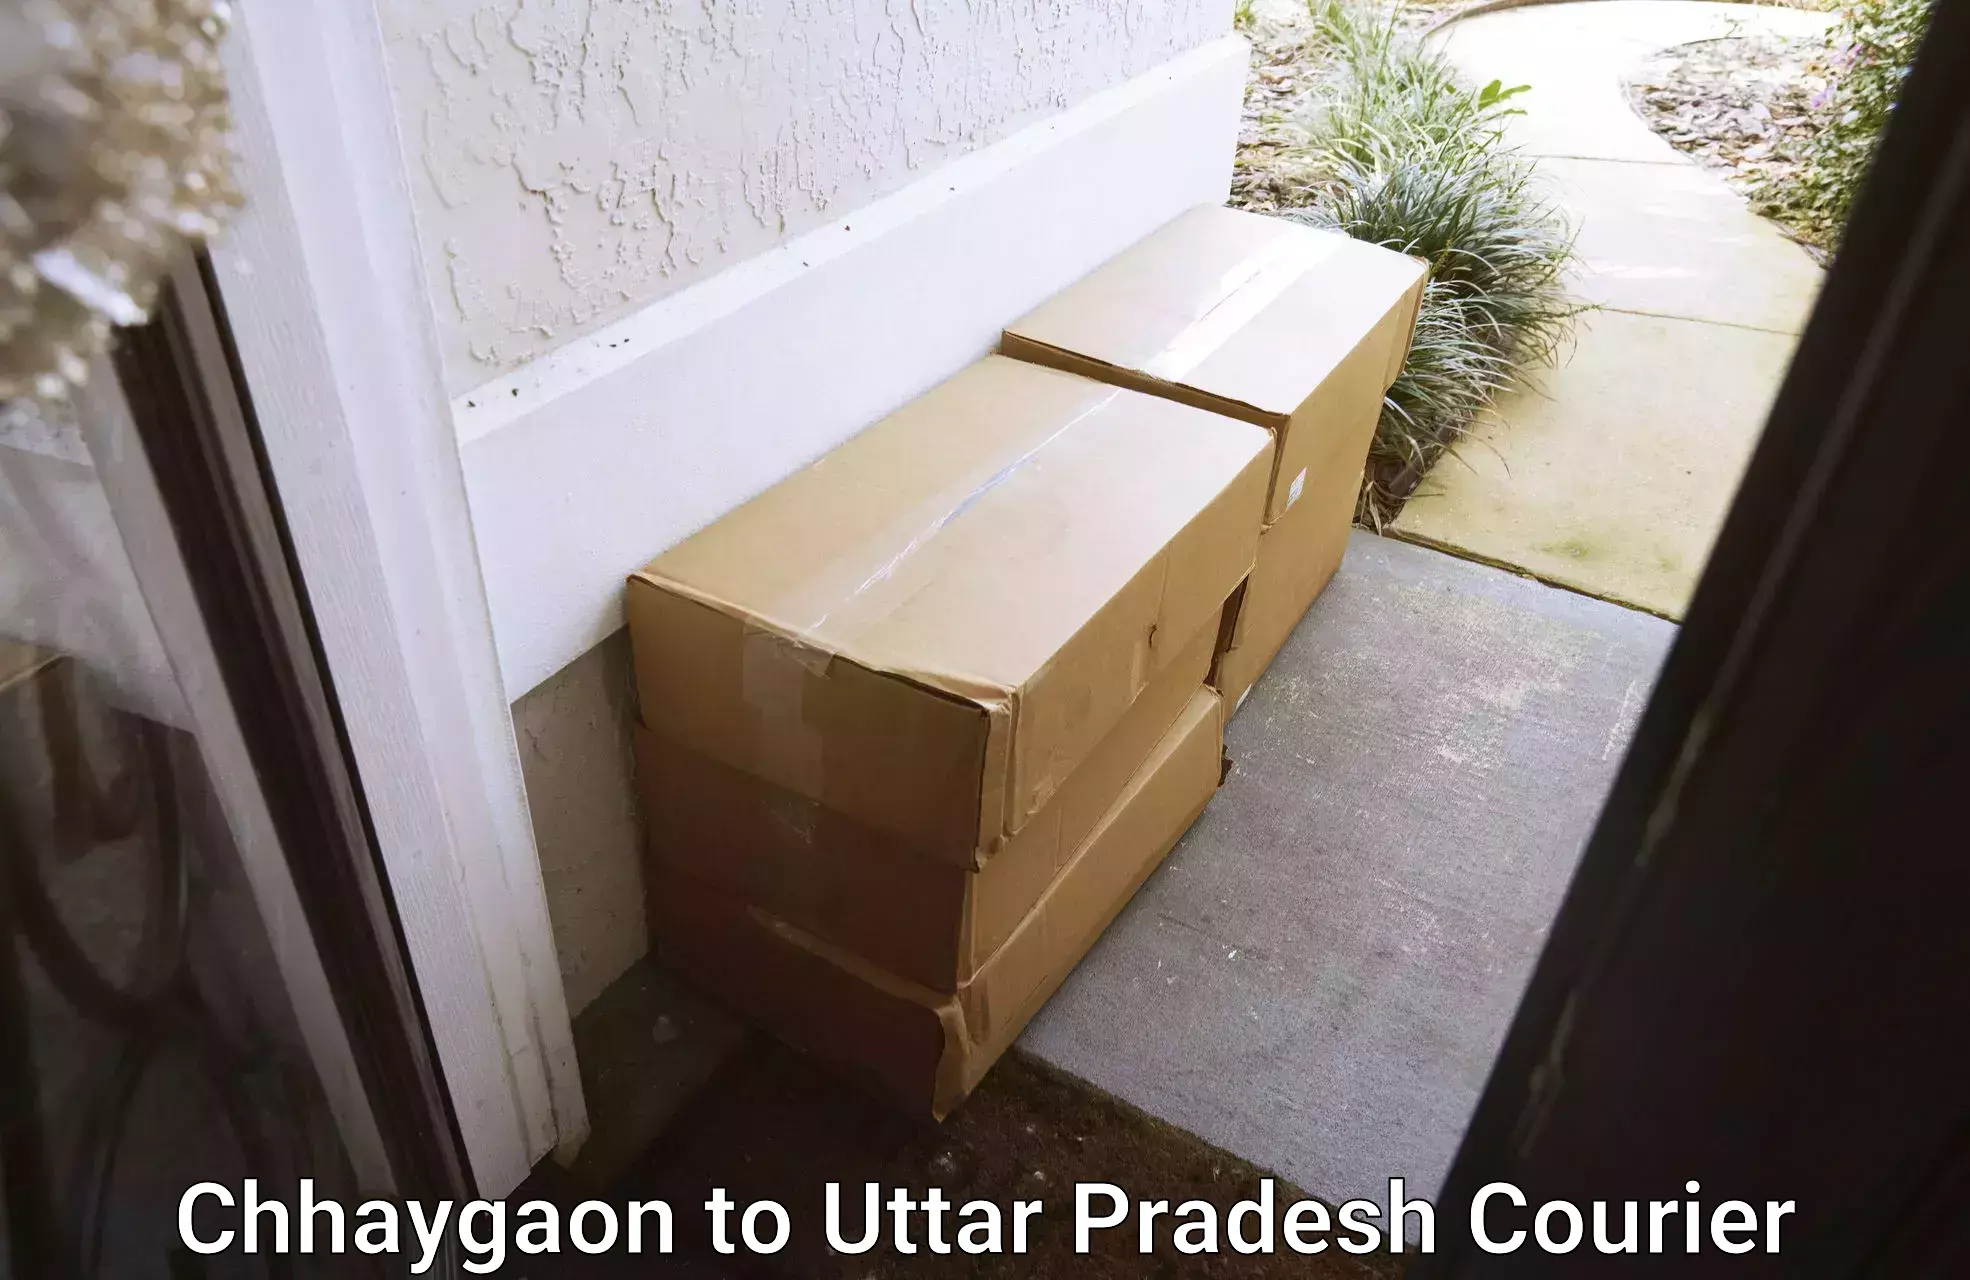 Next day courier Chhaygaon to Unnao